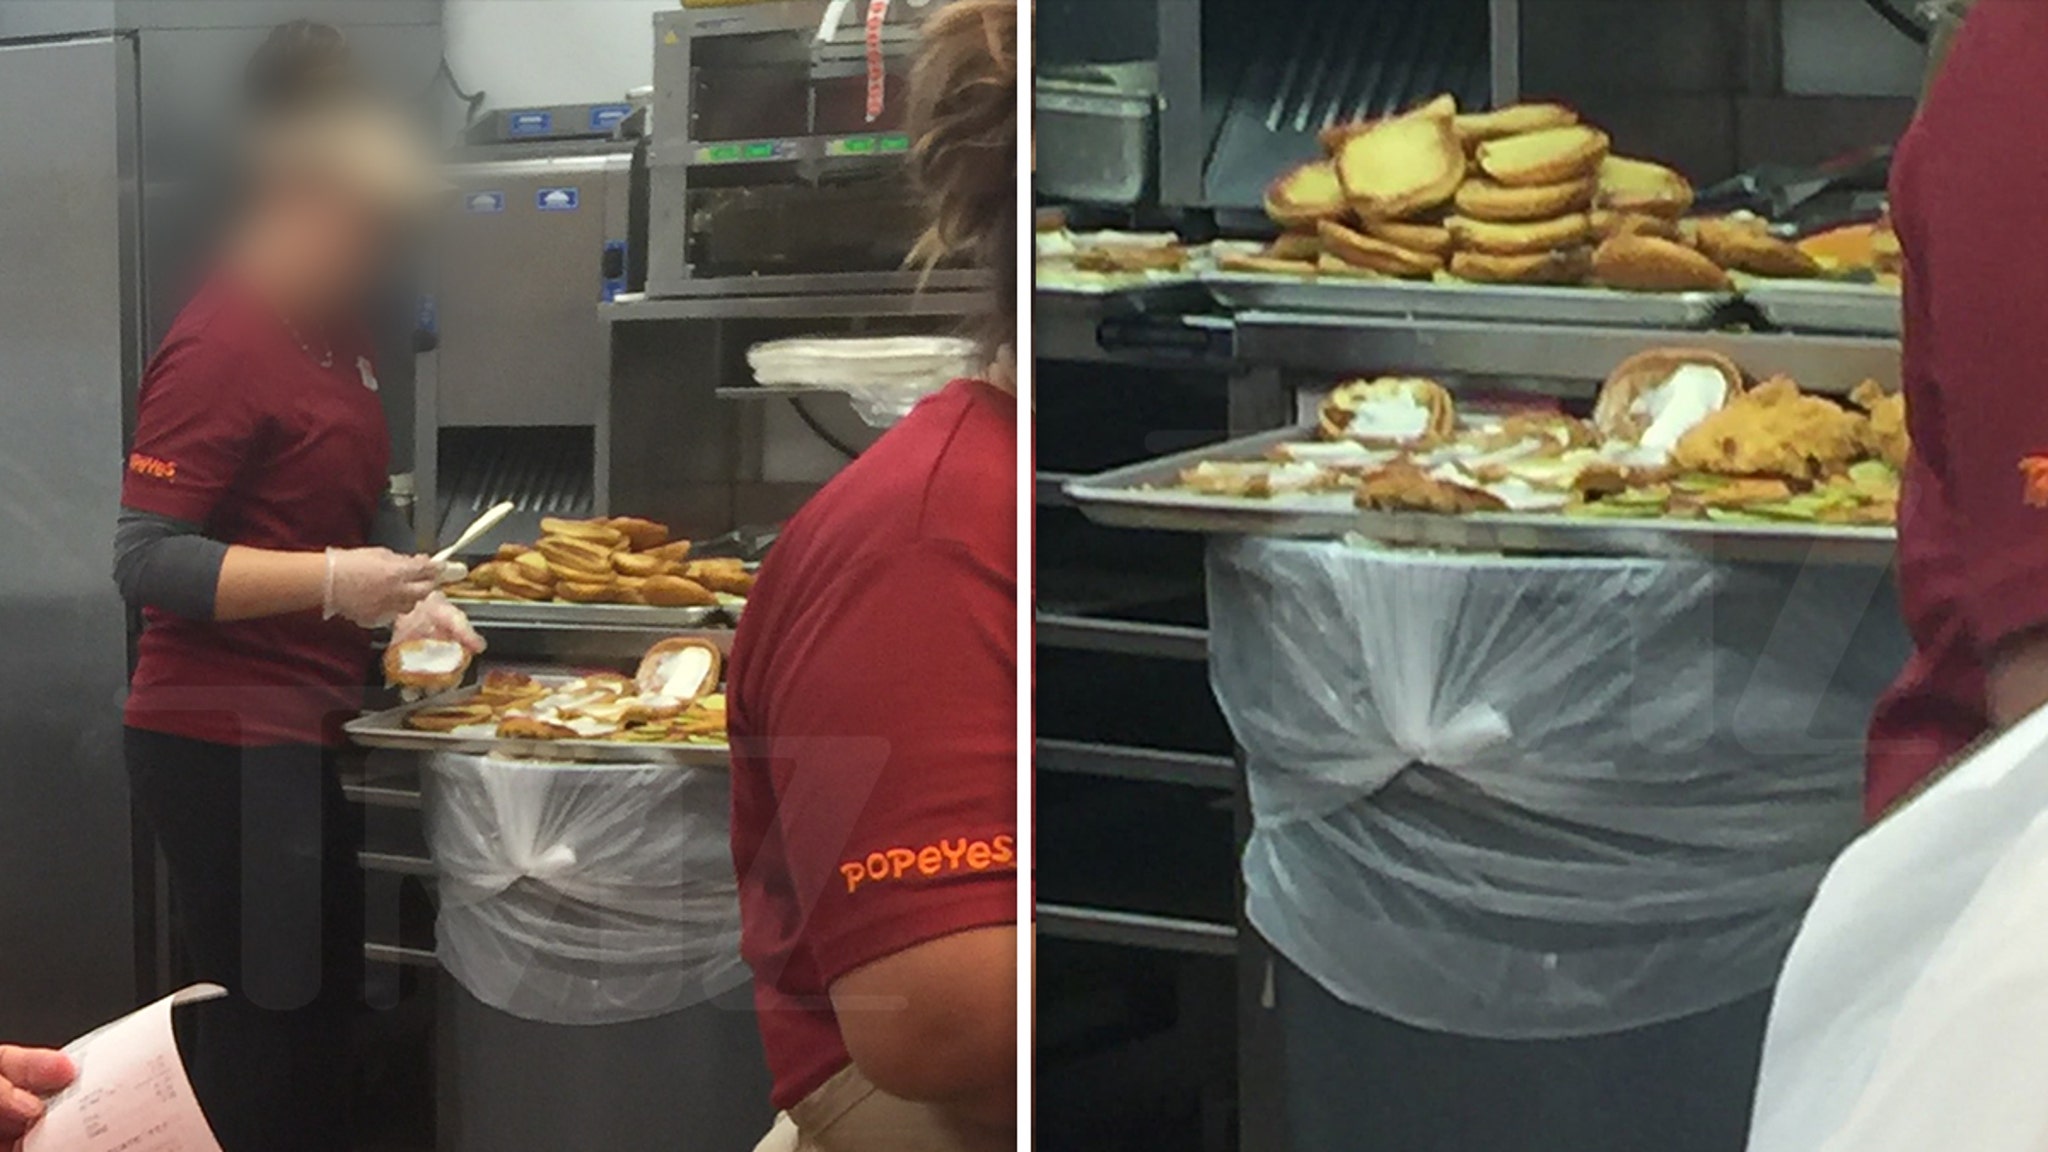 Popeyes Employee Made Chicken Sandwiches on Trash Bin, Owner Apologizes.